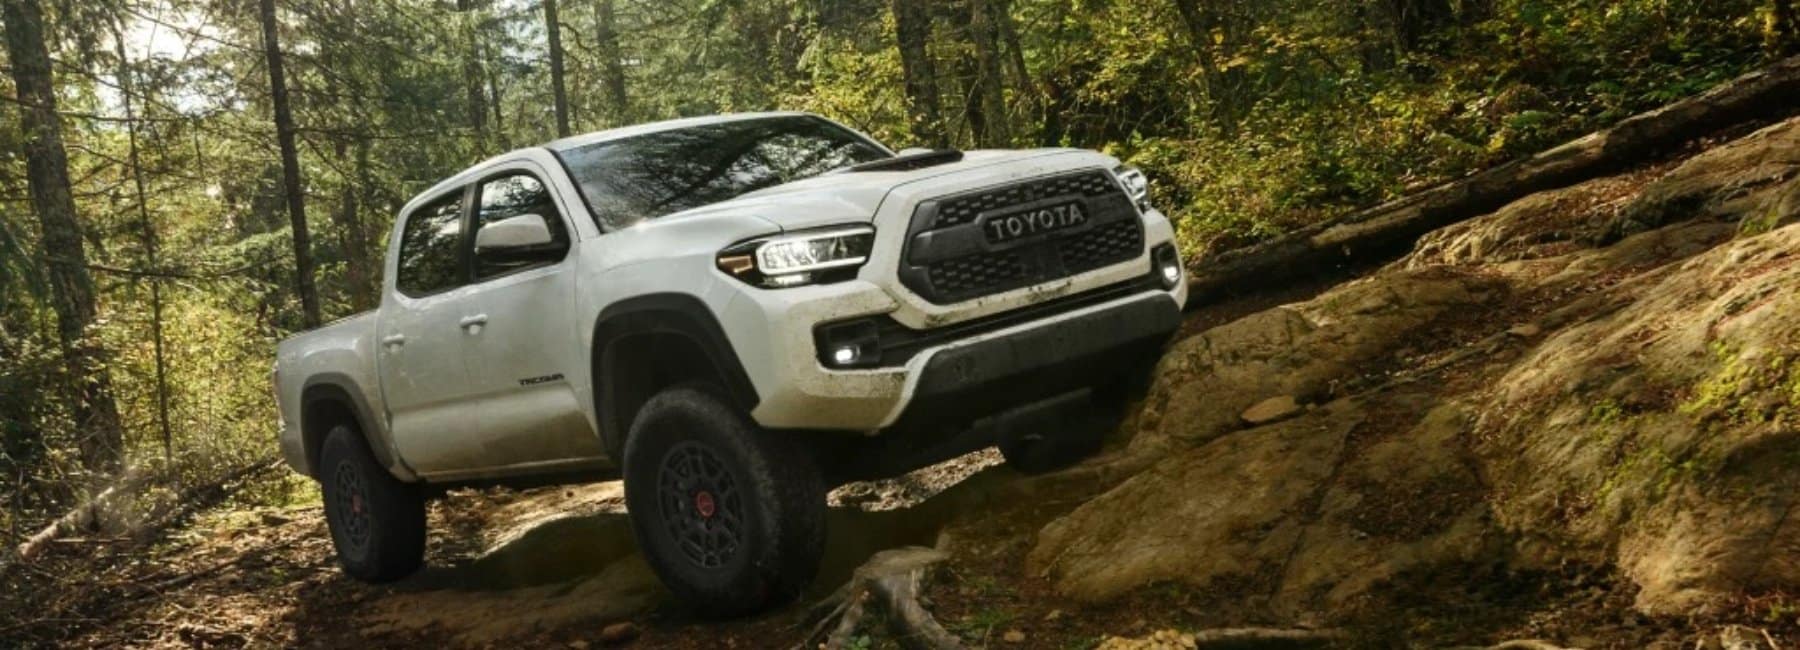 2022tacoma-angled-front-3qview-parked-in-forest-mushrooms-rocks-mudspattered-white